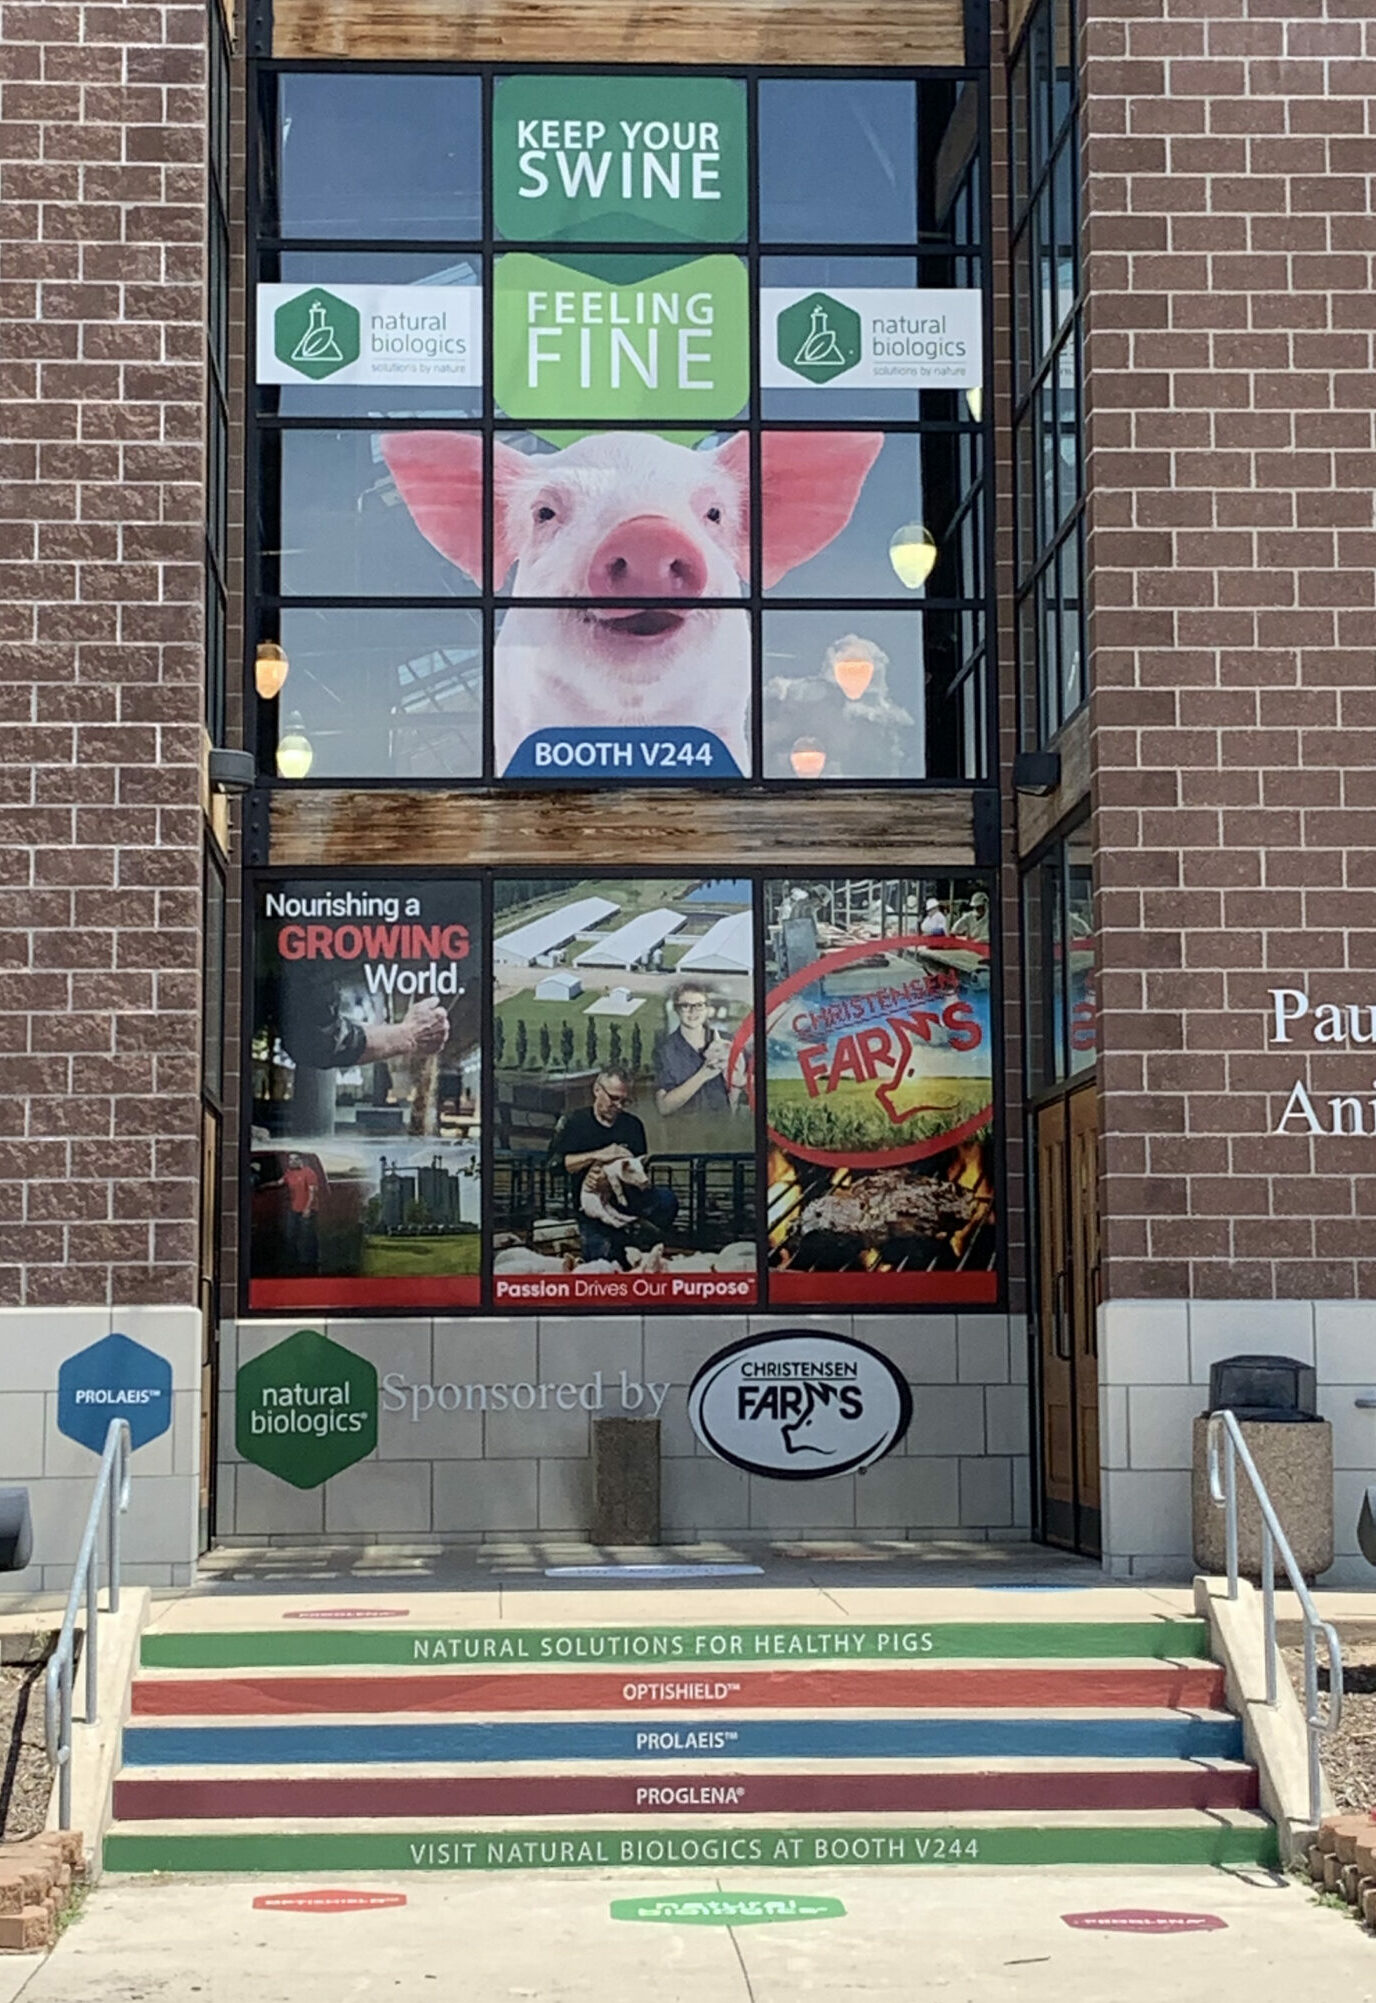 World Pork Expo Time Is Here!